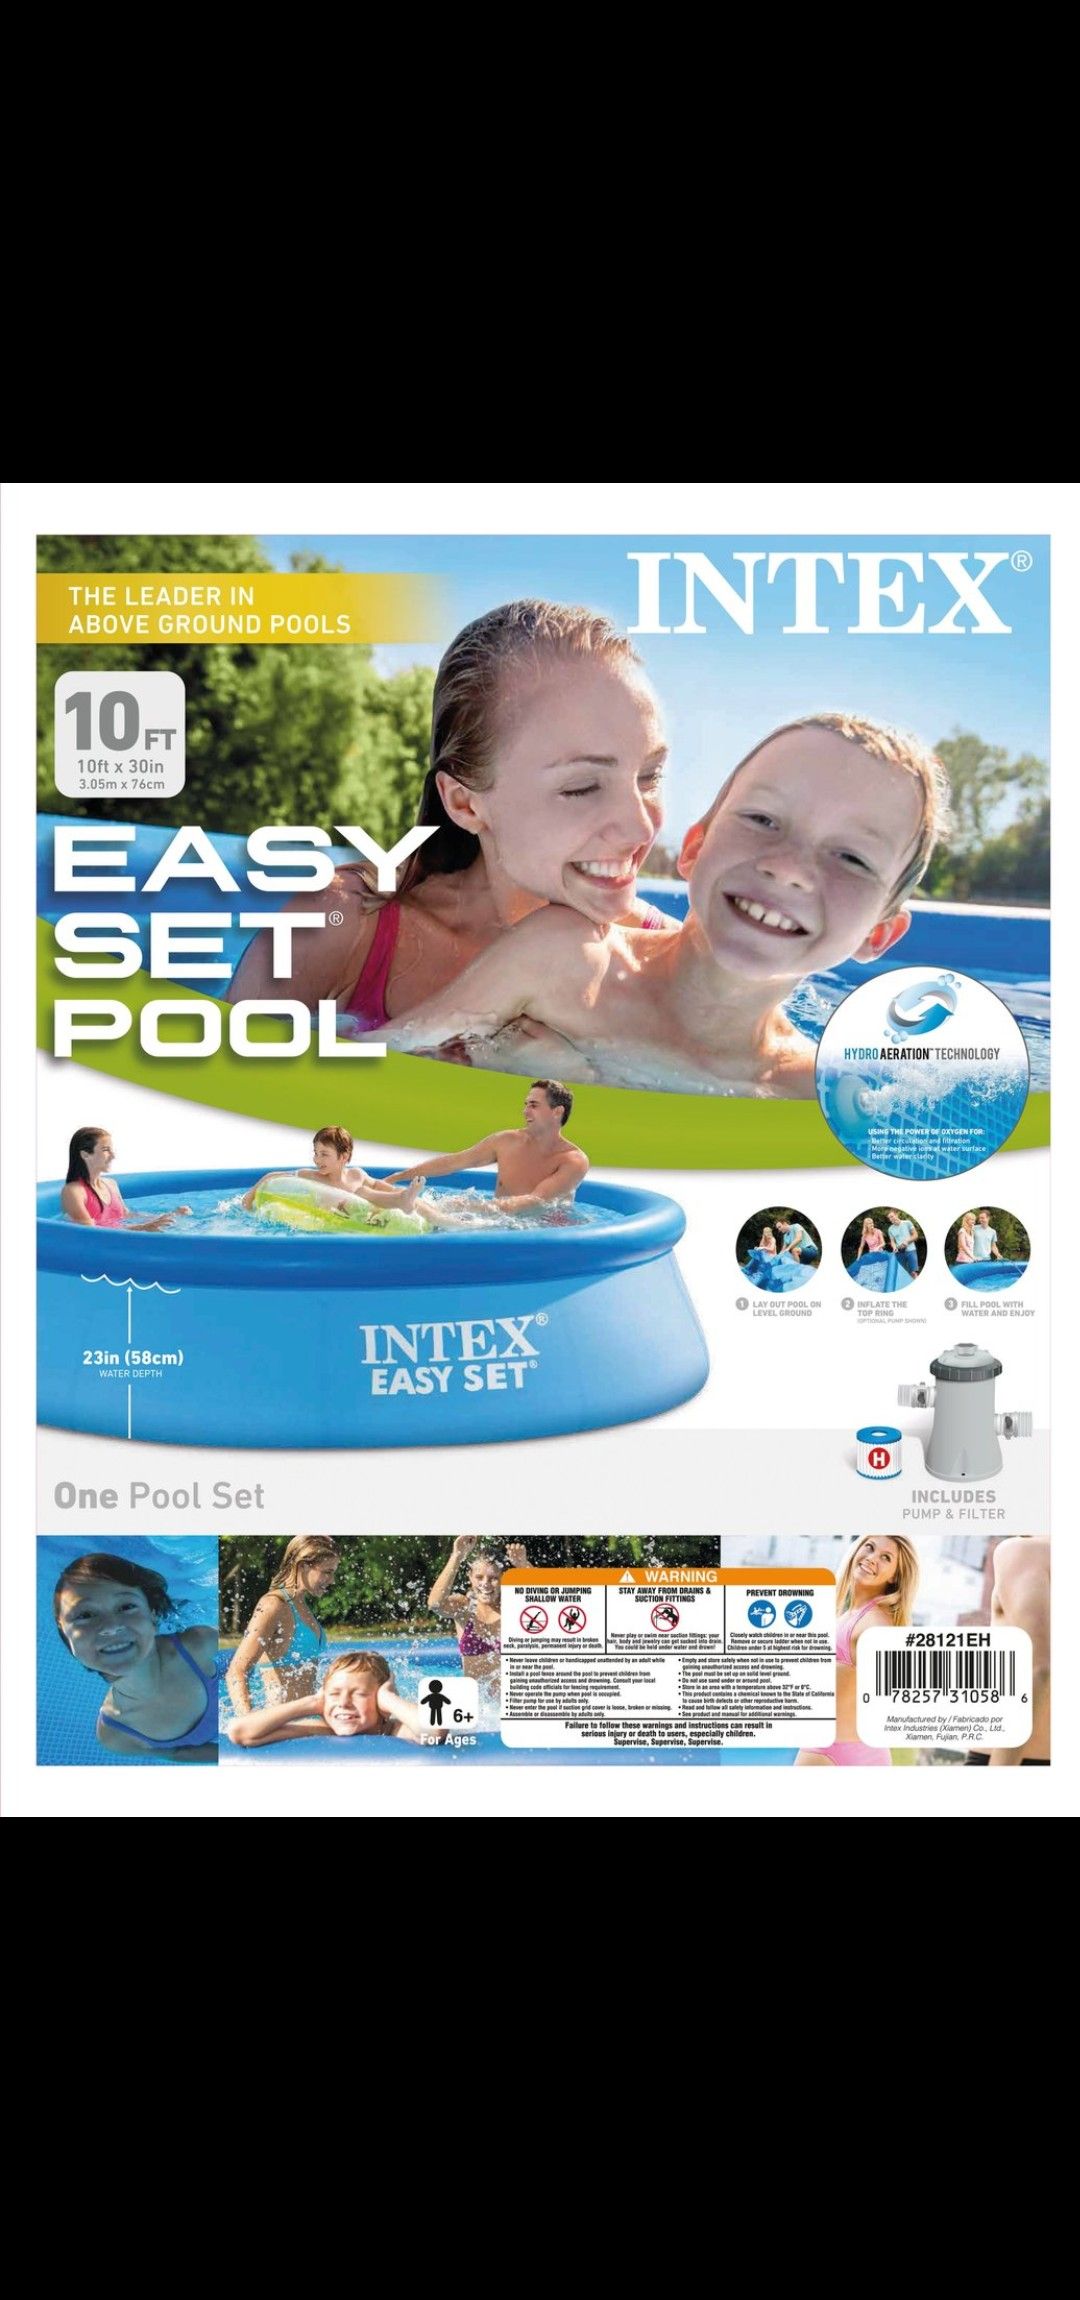 10 ft x 30 in Deep Inflatable Family Swimming Pool Comes with**PUMP AND FILTER** "Don't Be Fooled"